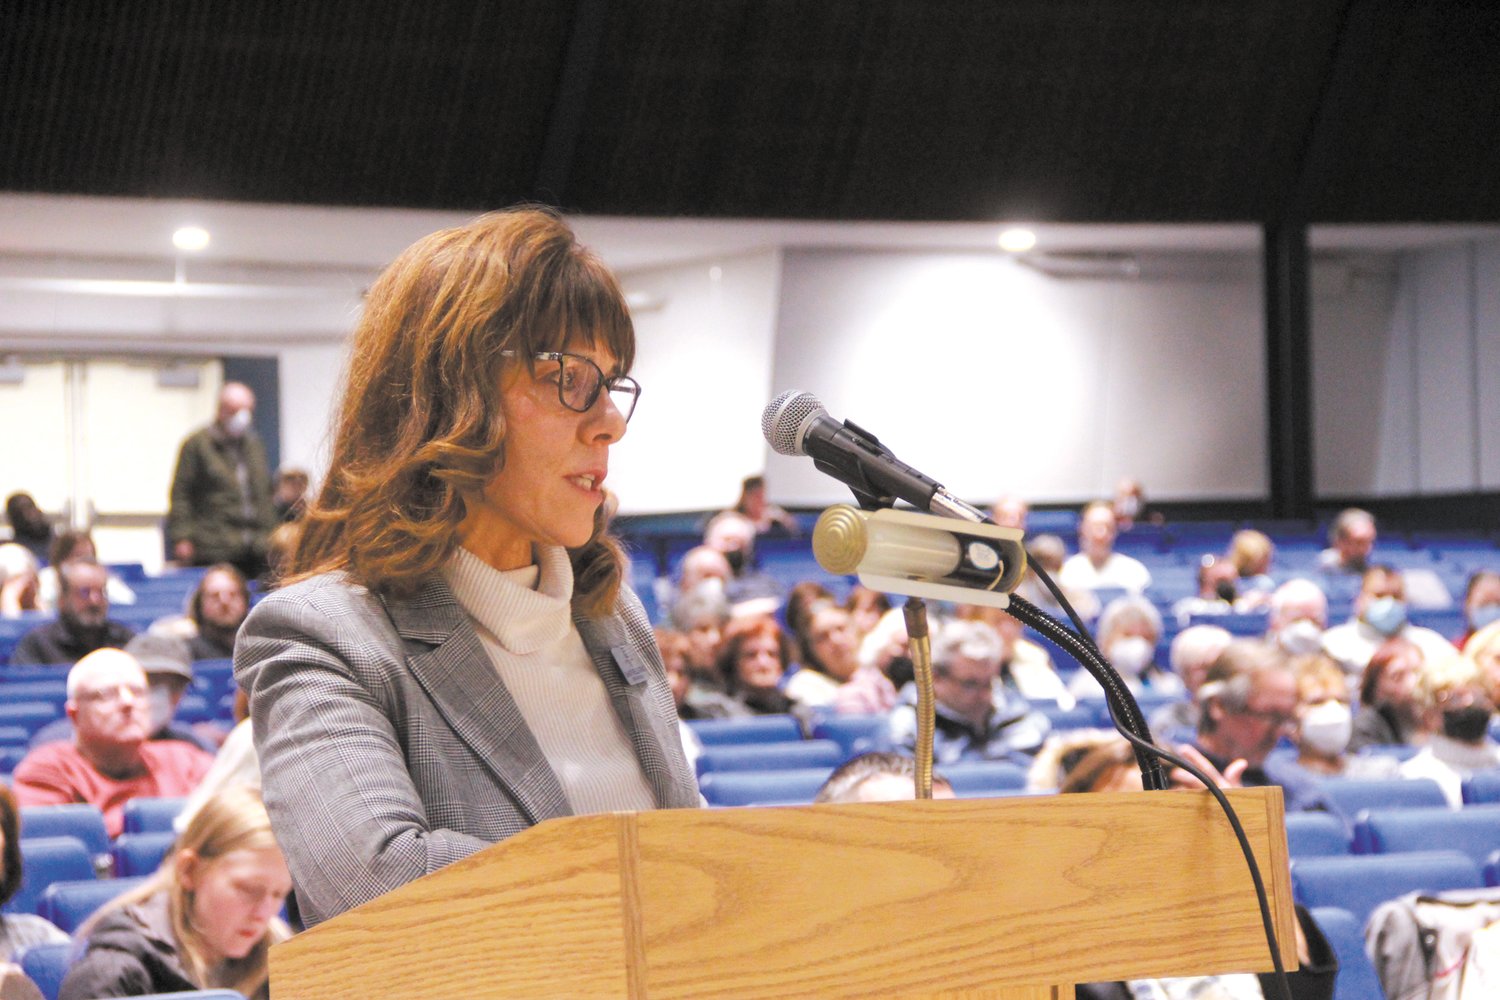 HER REASONS TO DENY THE DOG PARLOR:  Sandy Pellegrino, a Wethersfield Commons  resident and Coldwell Banker associate broker outlined the attributes of the community and her fear that the dog parlor would negatively impact the complex.